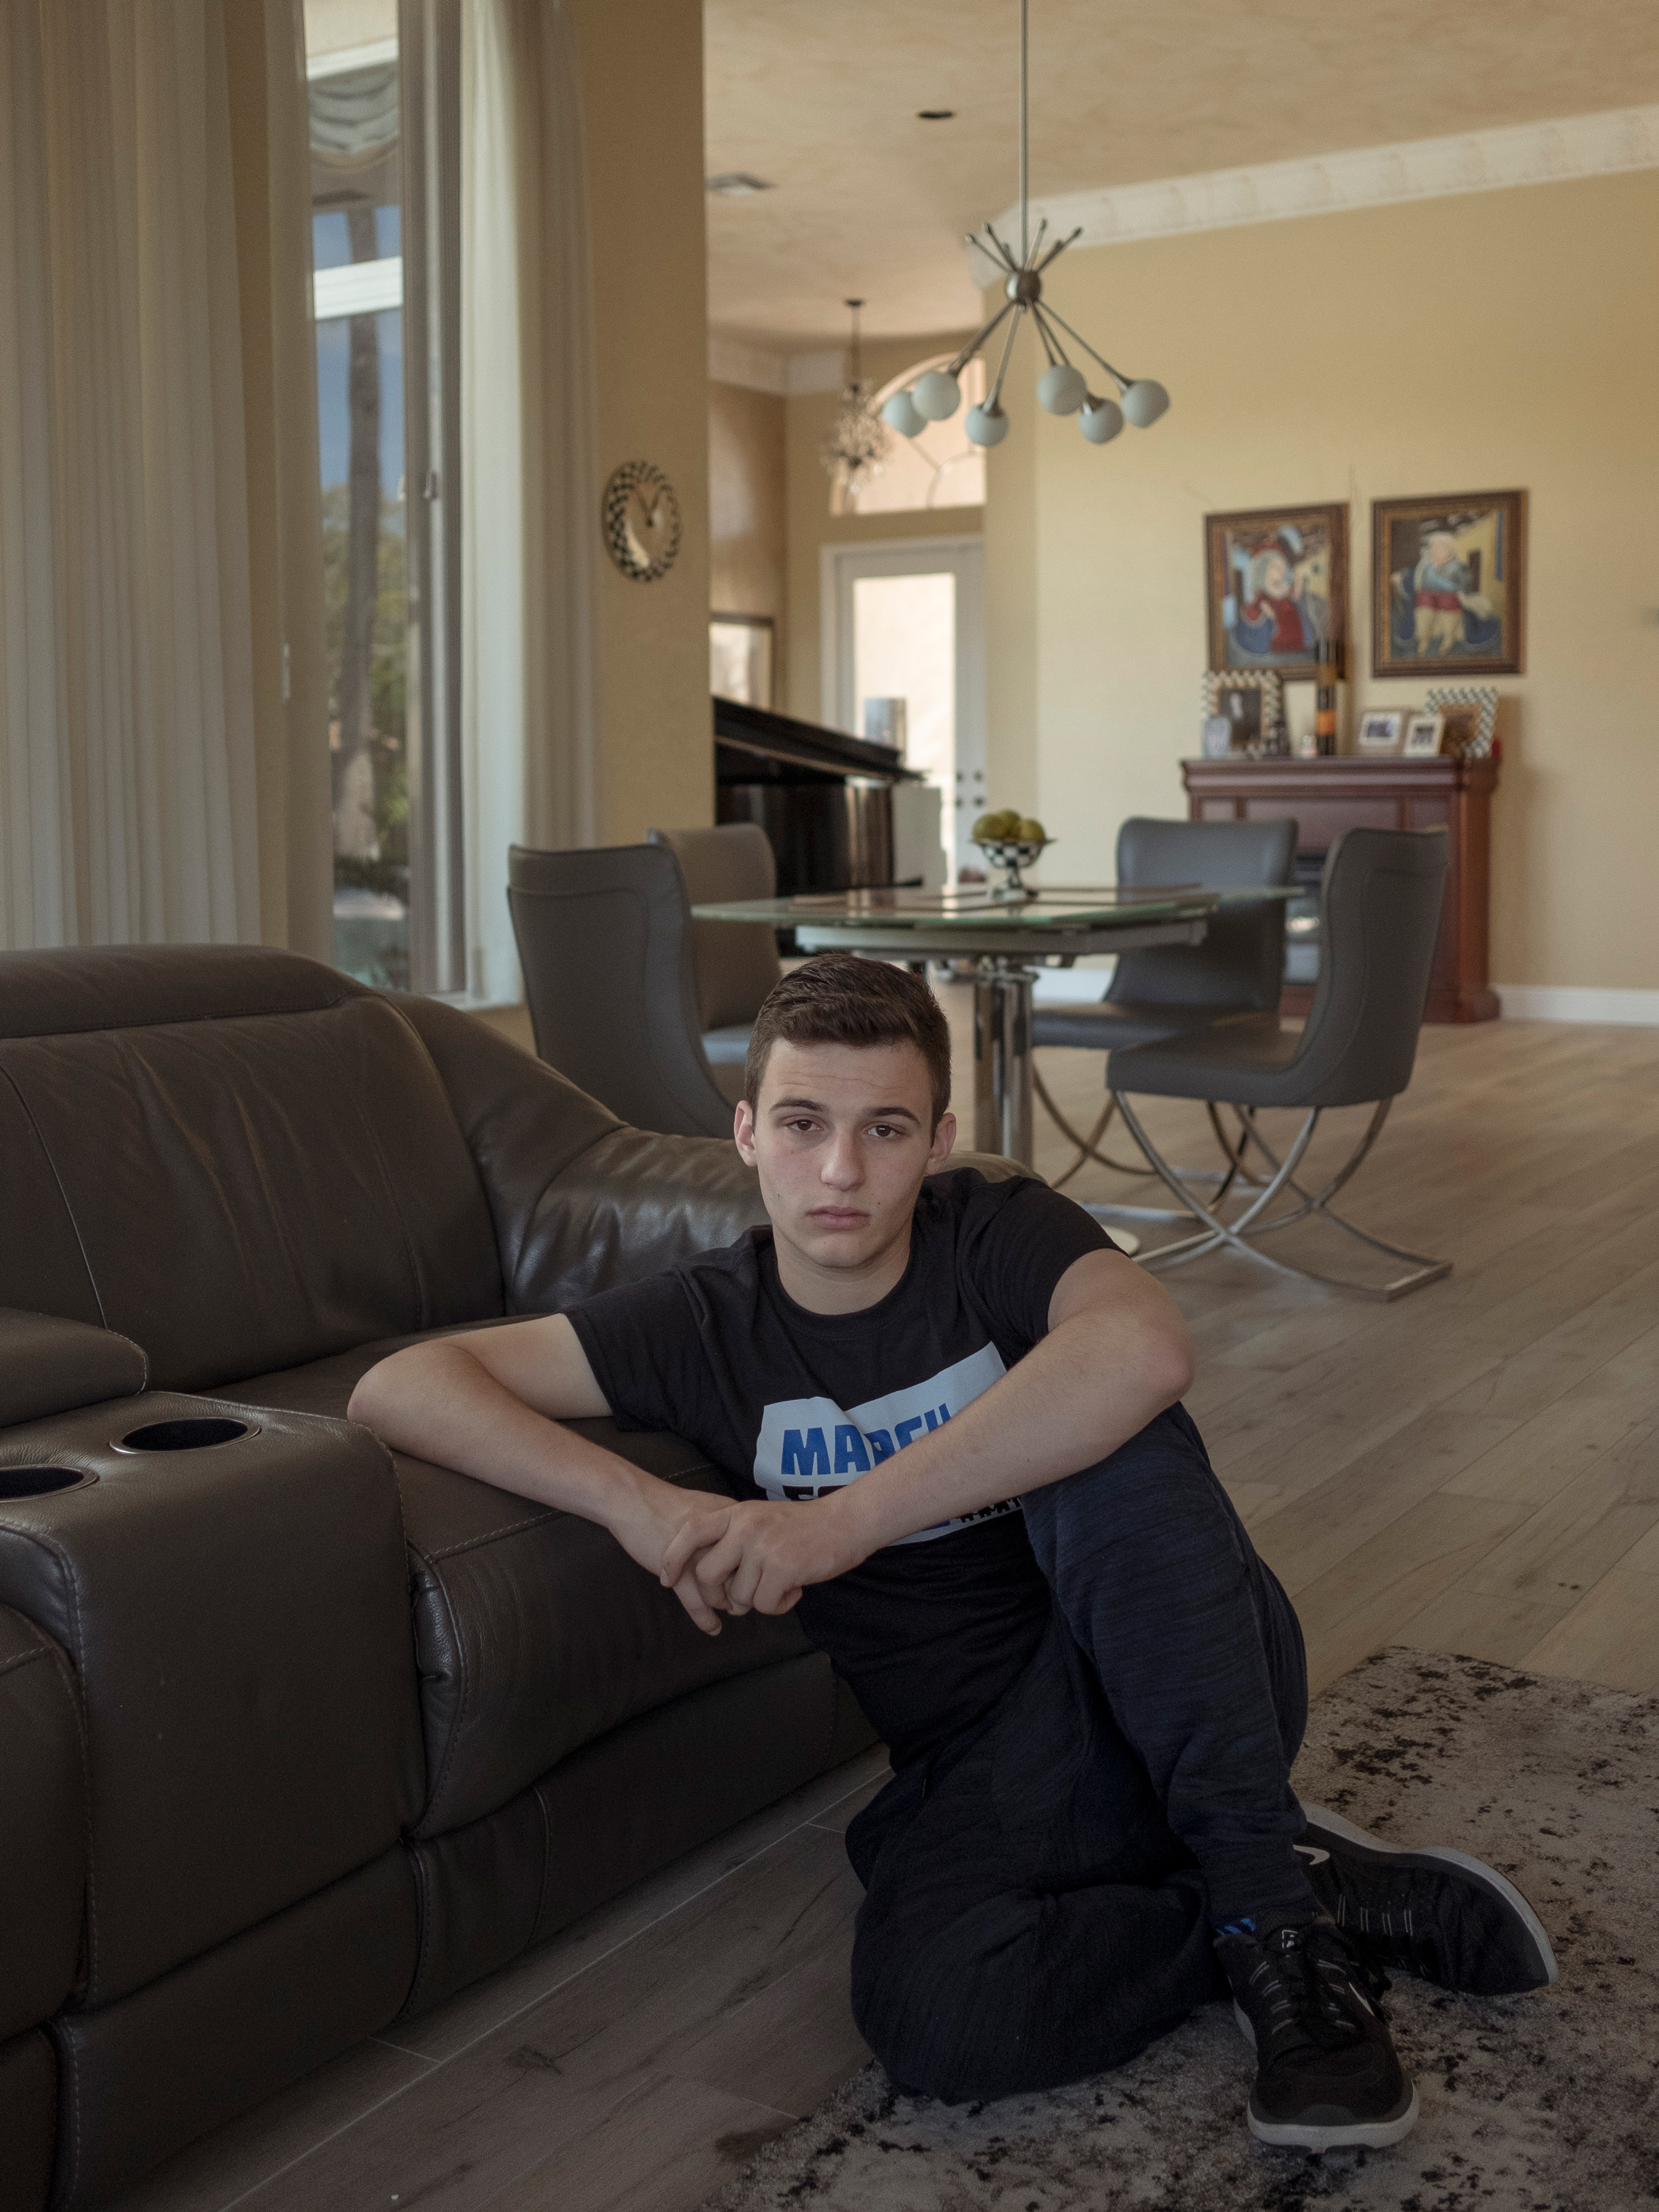 Cameron Kasky at his home in Parkland. (Gabriella Demczuk for TIME)